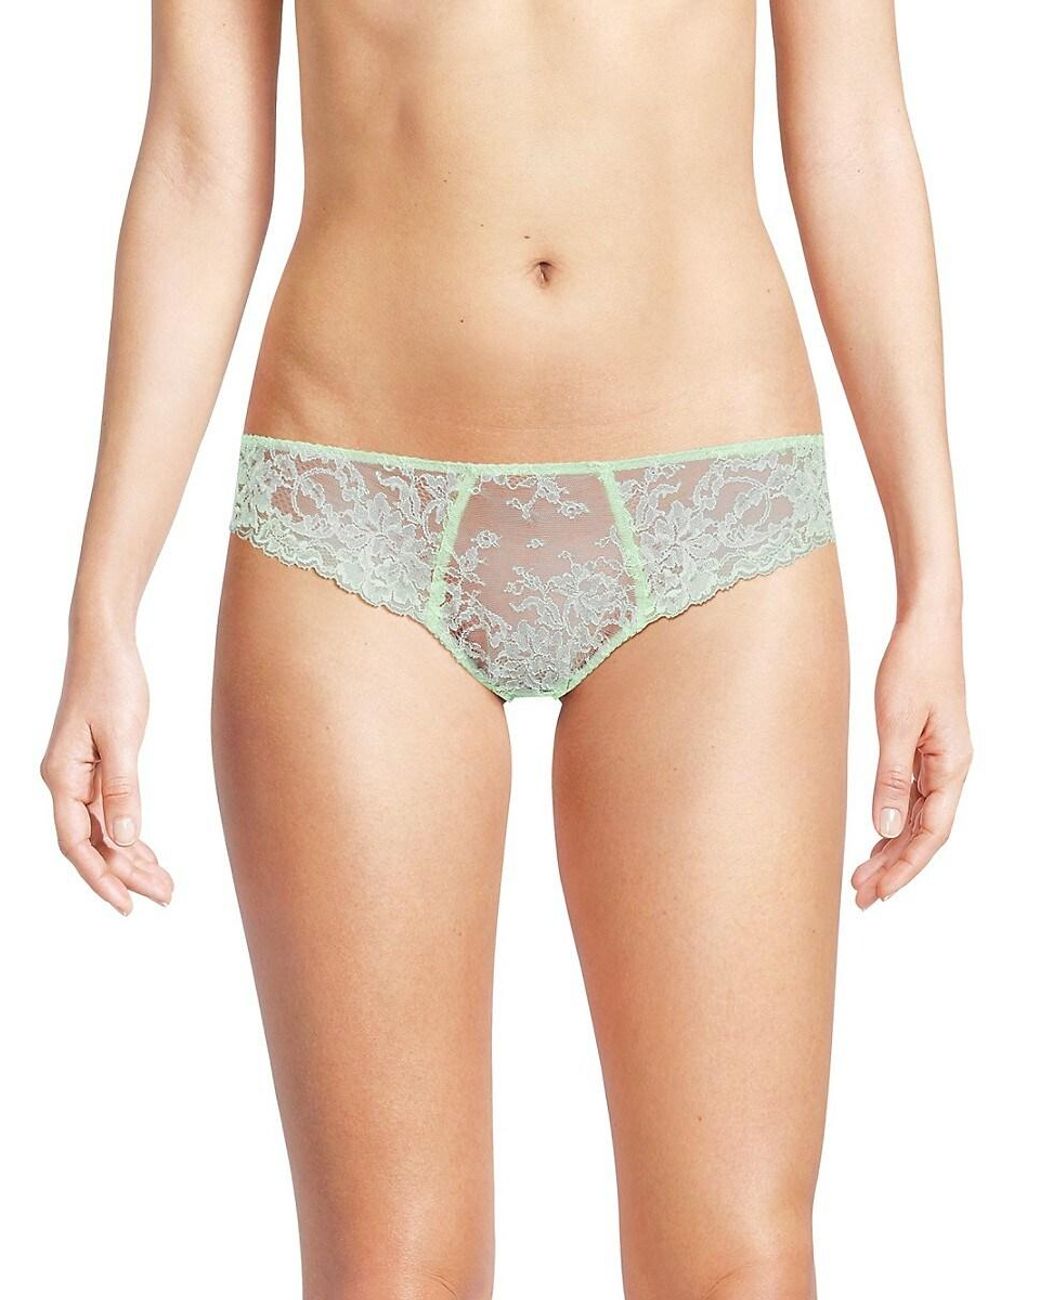 Journelle - Lace & Day